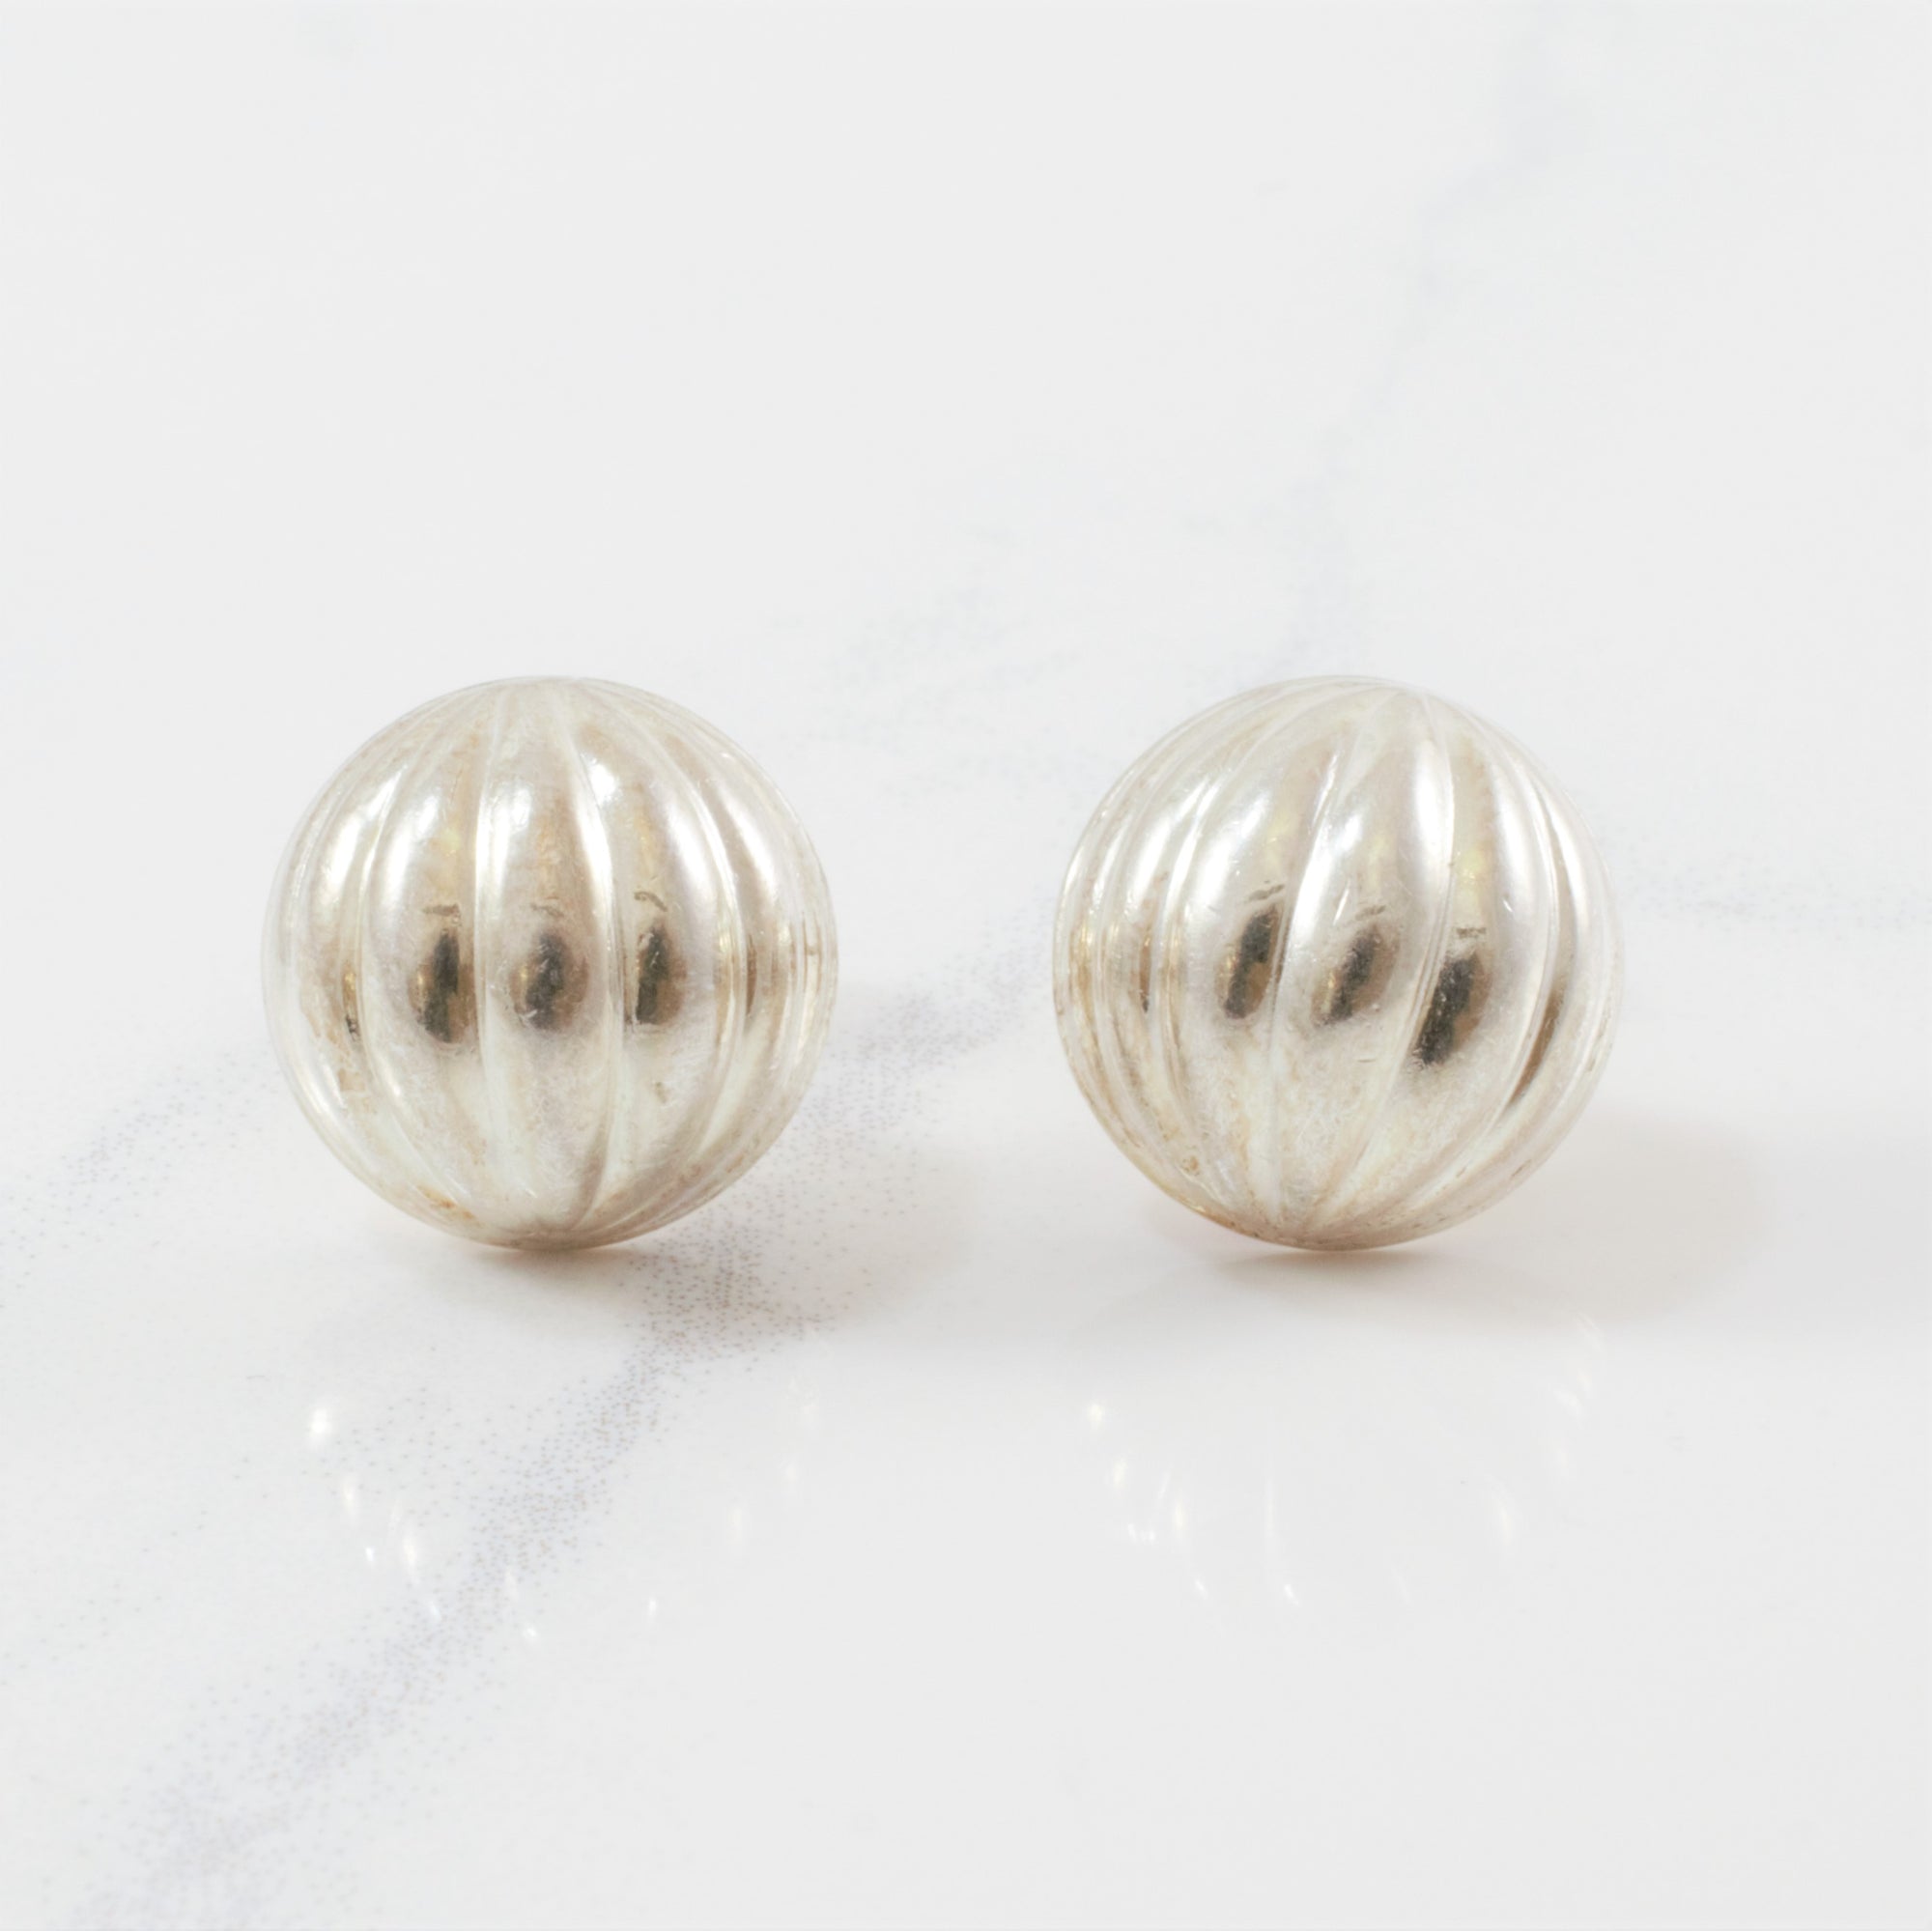 'Birks' Textured Dome Earrings